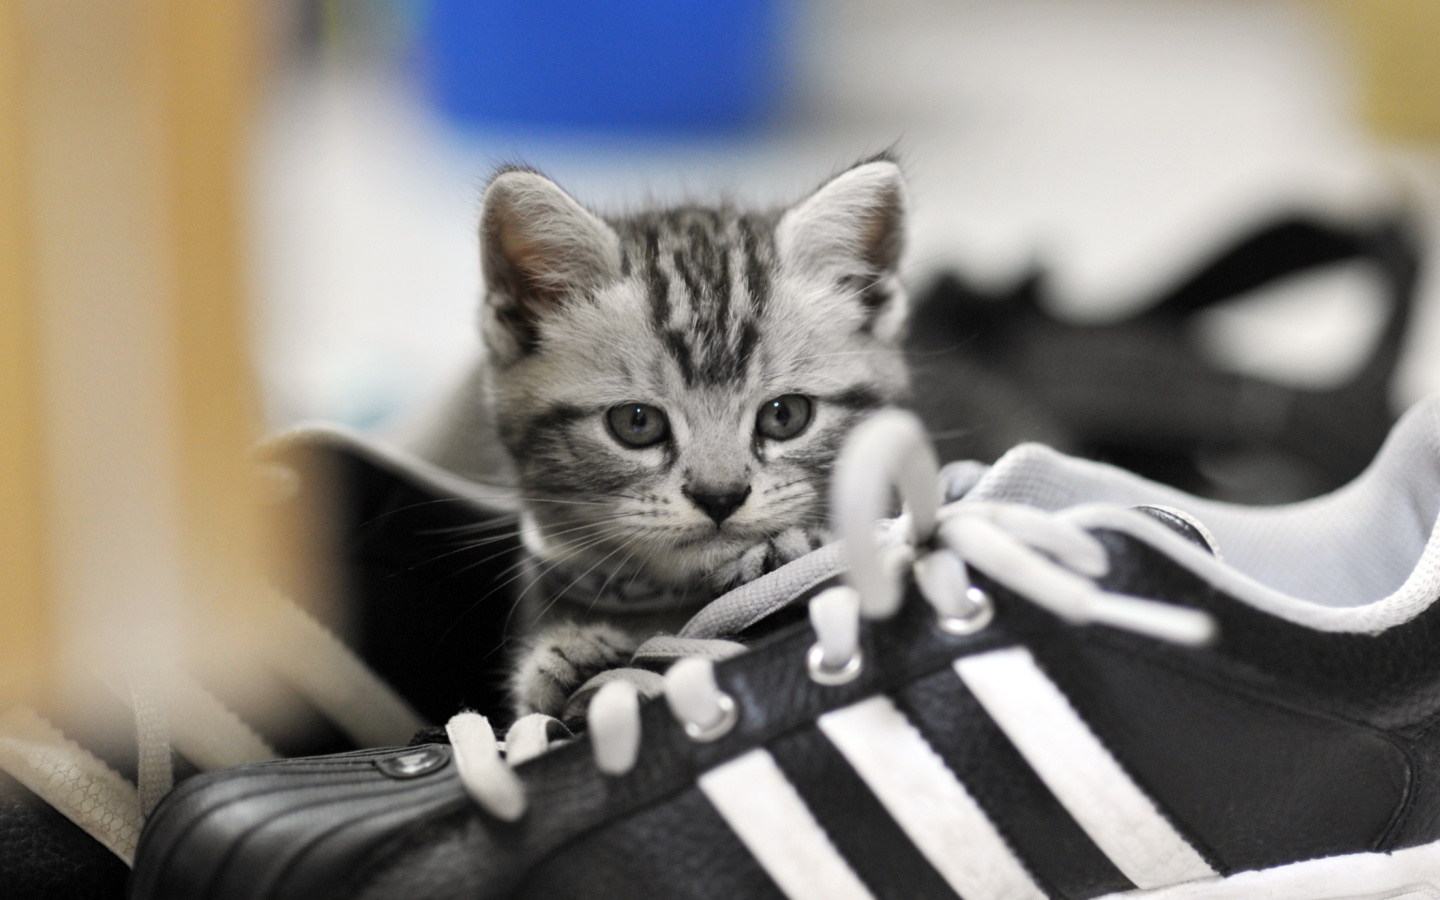 Kitten with shoes wallpaper 1440x900